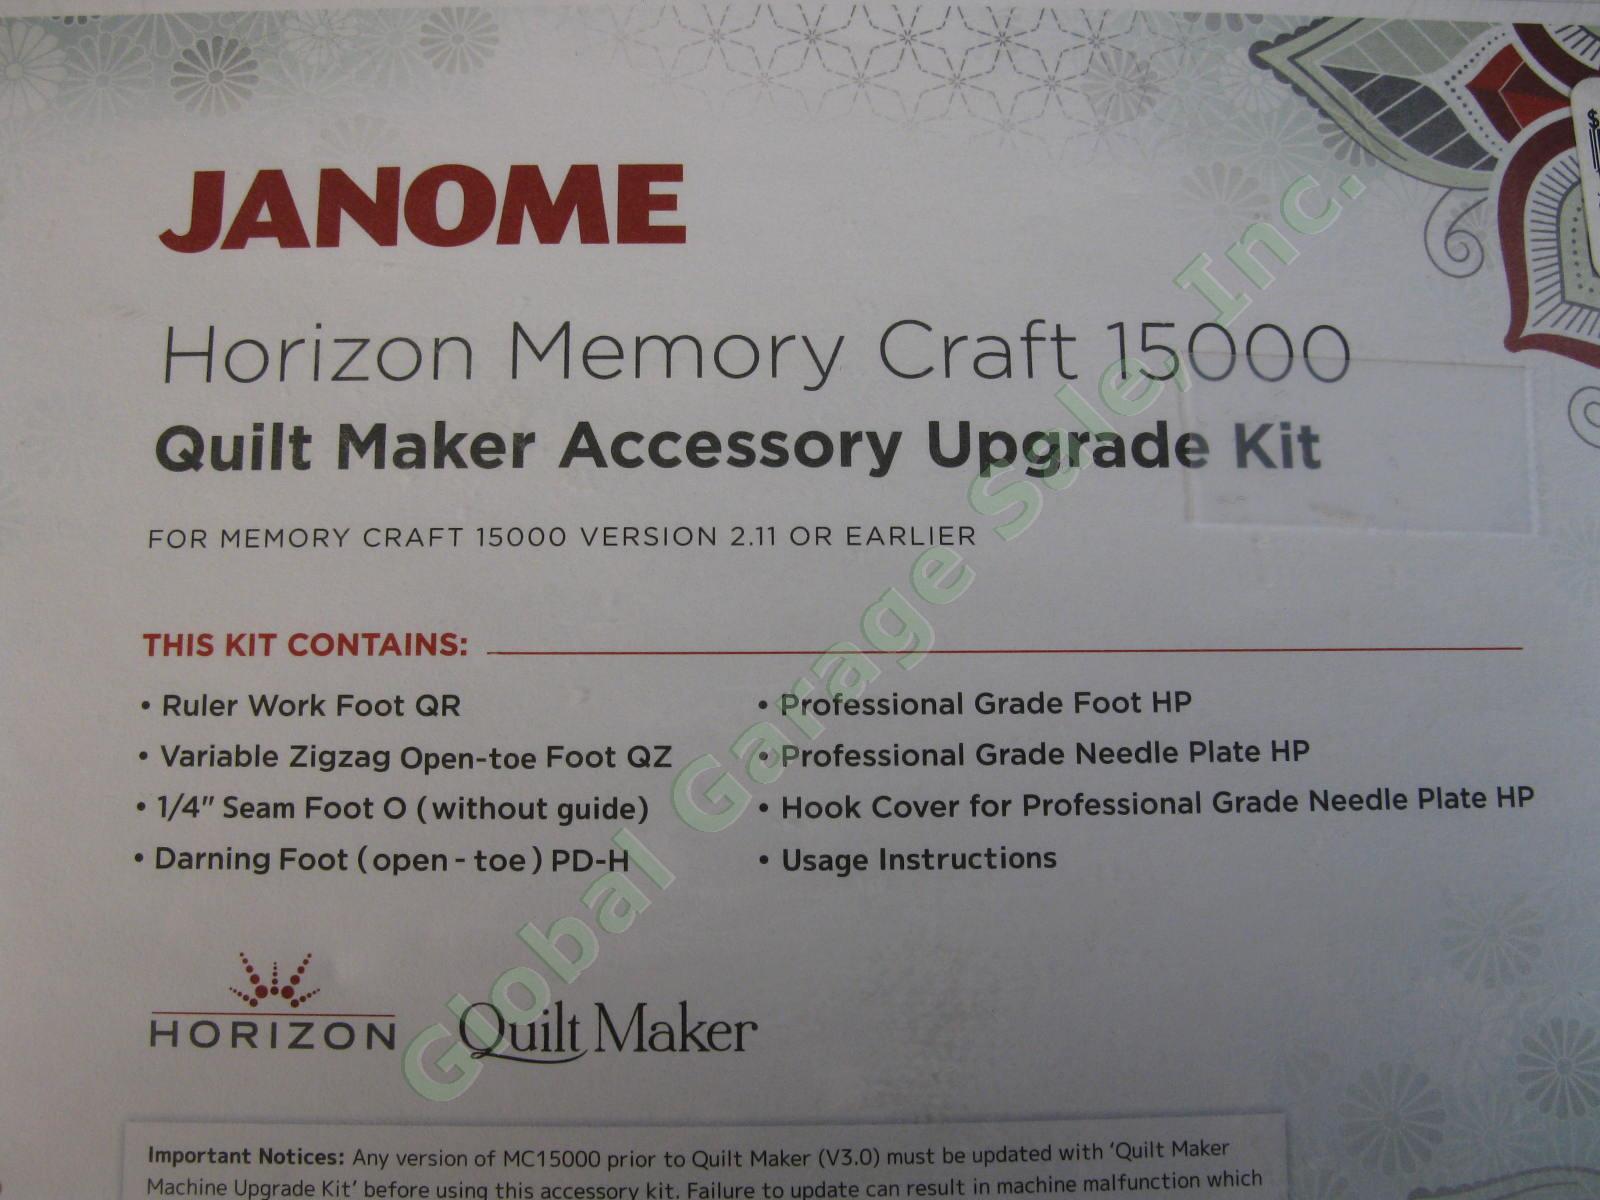 Janome Memory Craft 15000 Quilt Maker Accessory Upgrade Kit 5 Feet Needle Plate 1